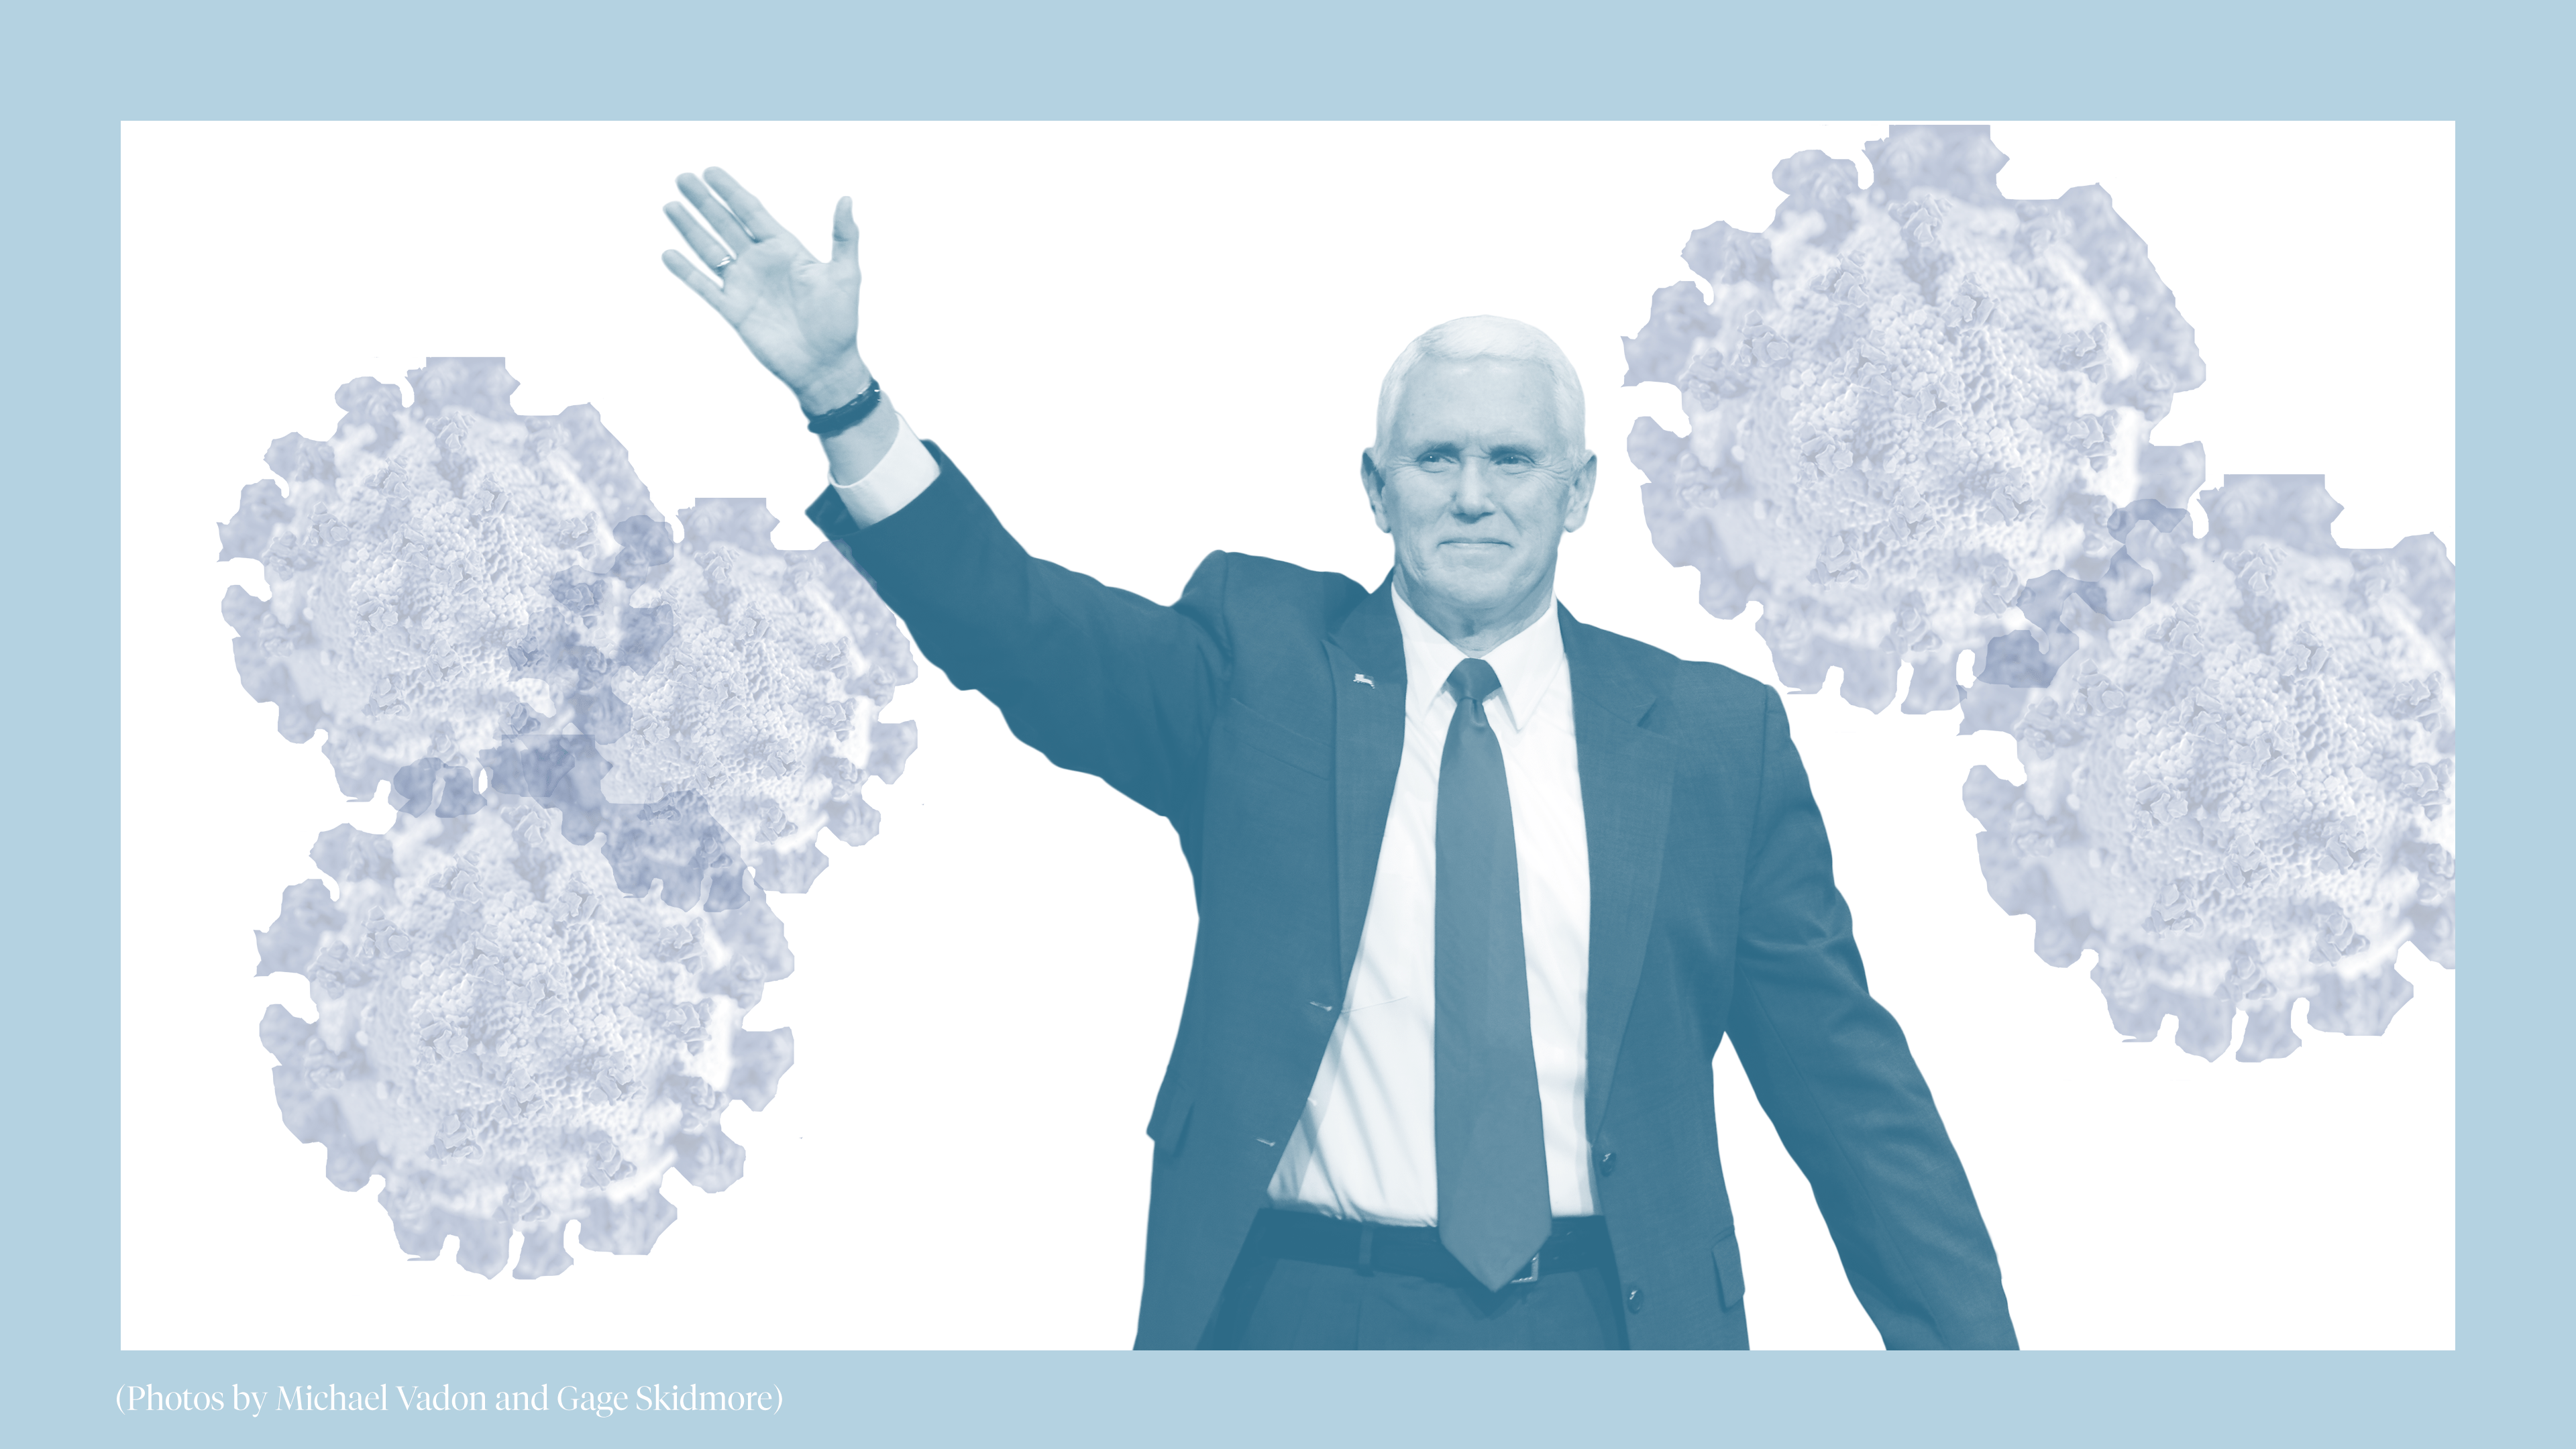 Mike Pence pictured in front of coronavirus particles.